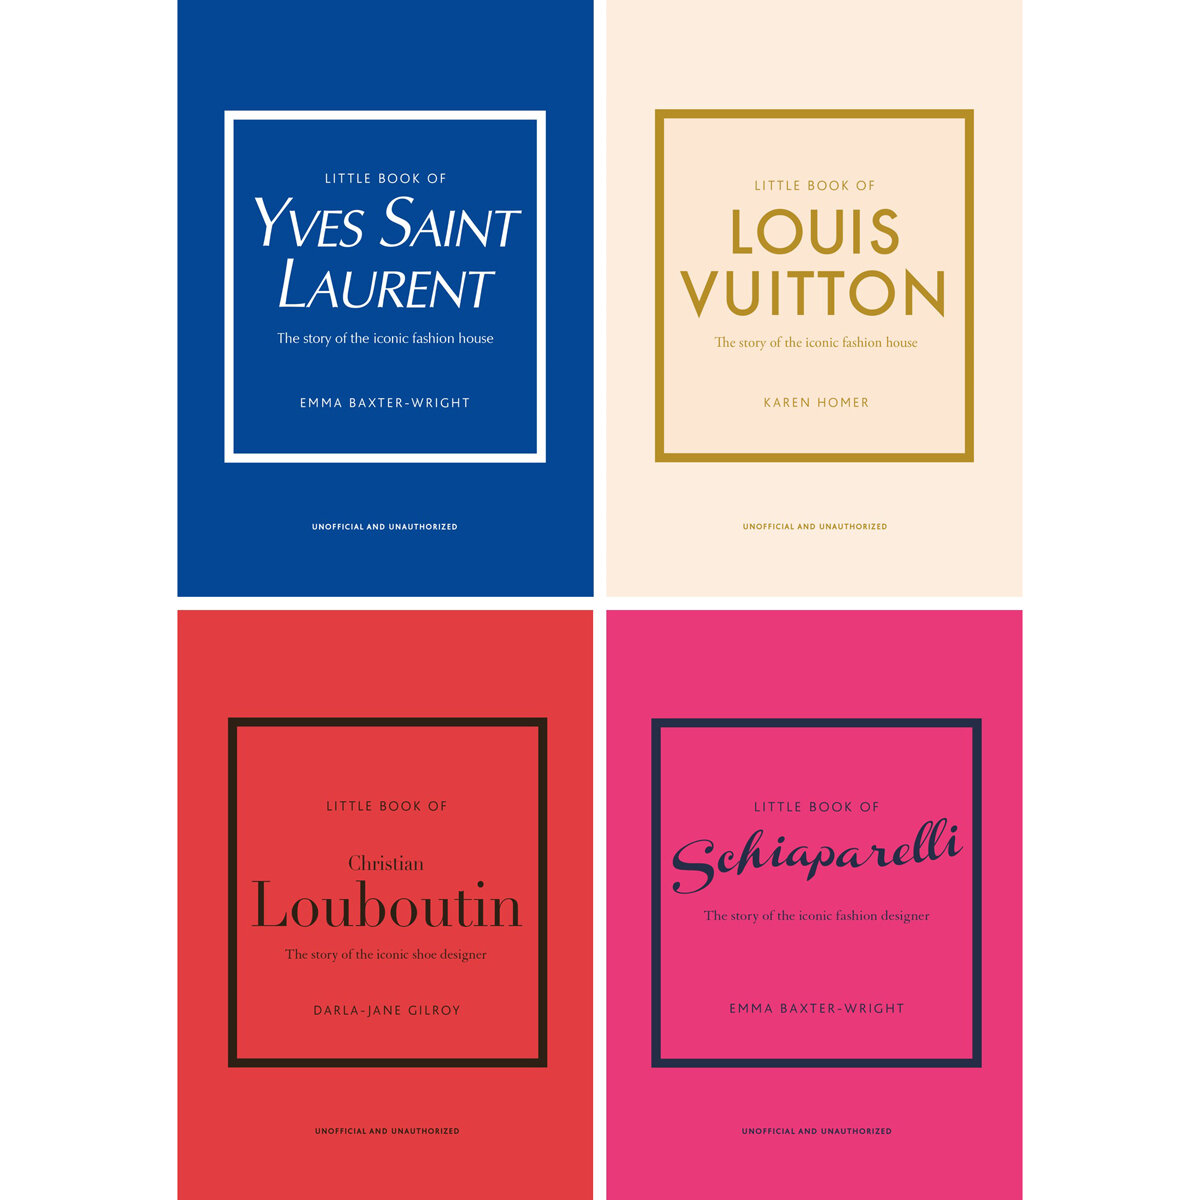 little guide to style louis vuitton